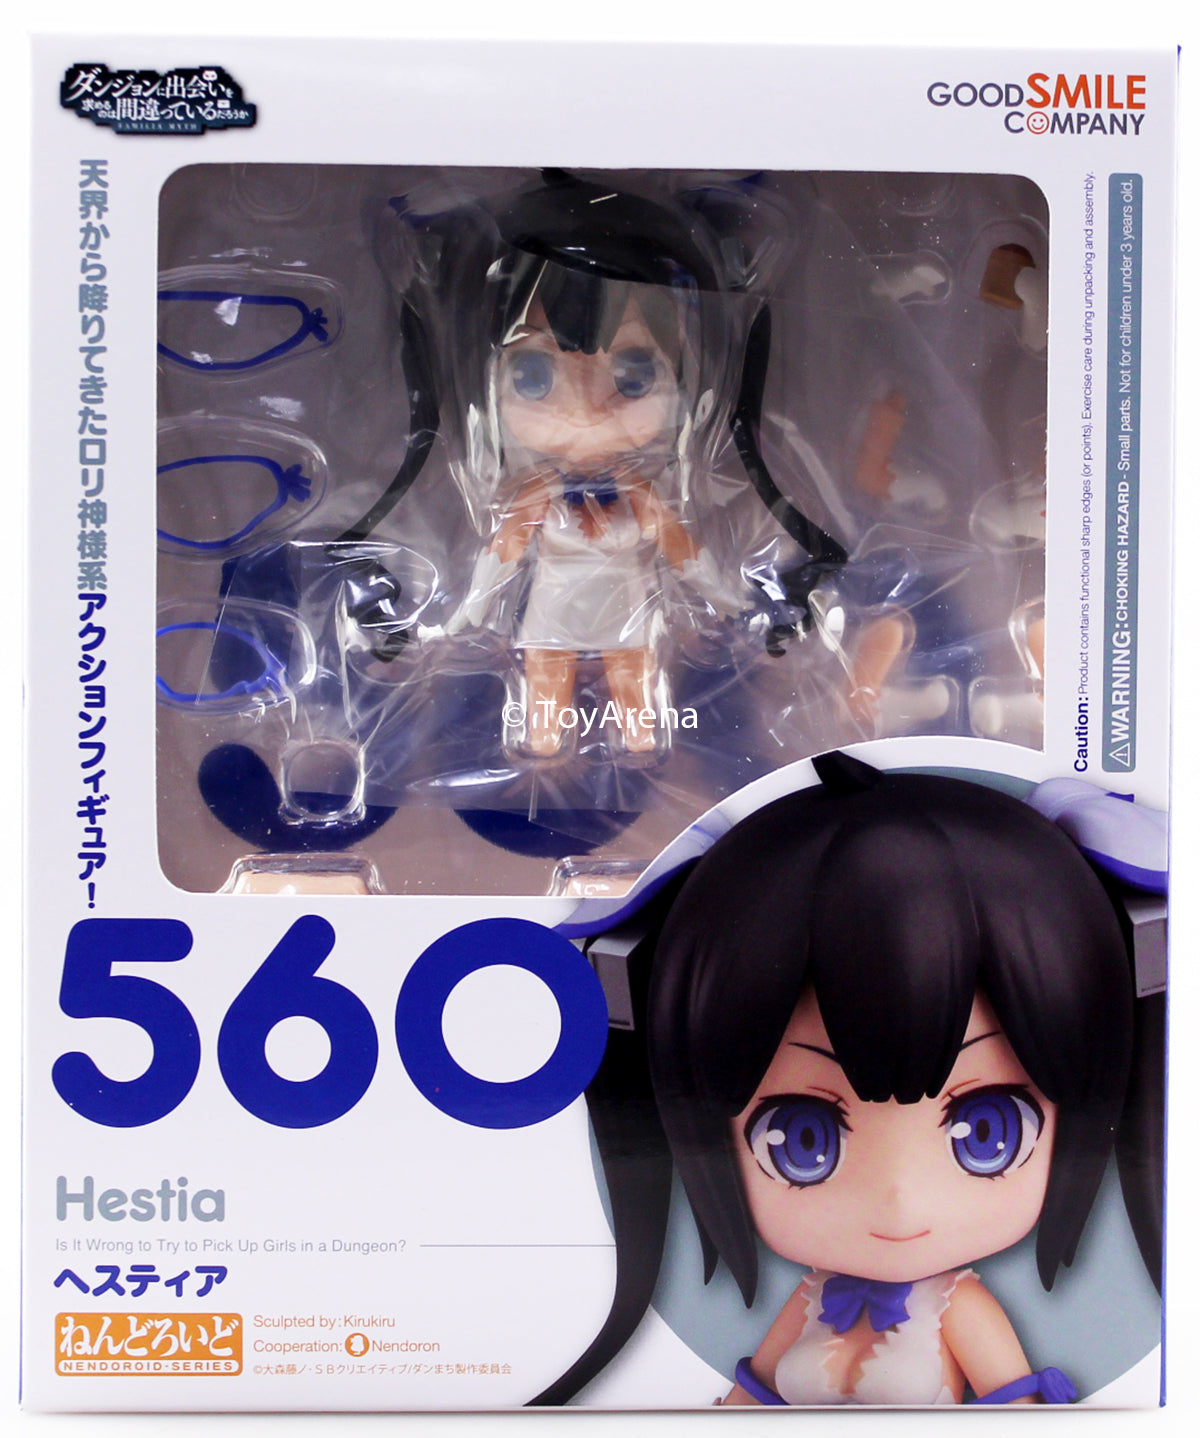 Nendoroid #560 Hestia Is It Wrong to Try to Pick Up Girls in a Dungeon?